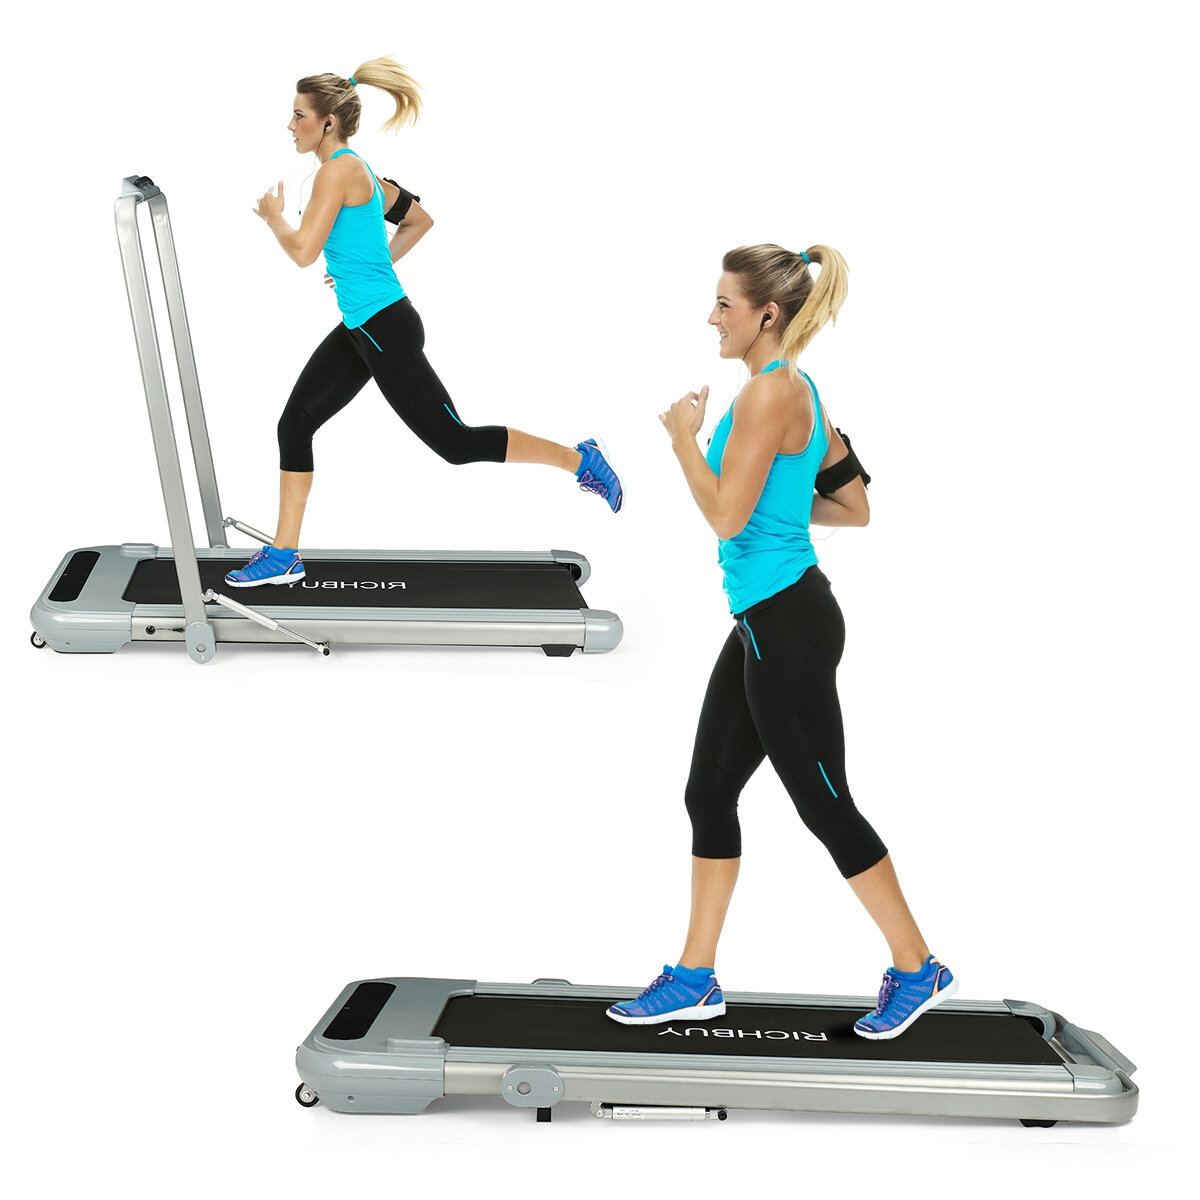 Image of 05-6 Km/h 500W 220V YC-P05 Treadmill Foldable Assemble-free Indoor Super Quiet Walking Pad With LED Display Remote Cont